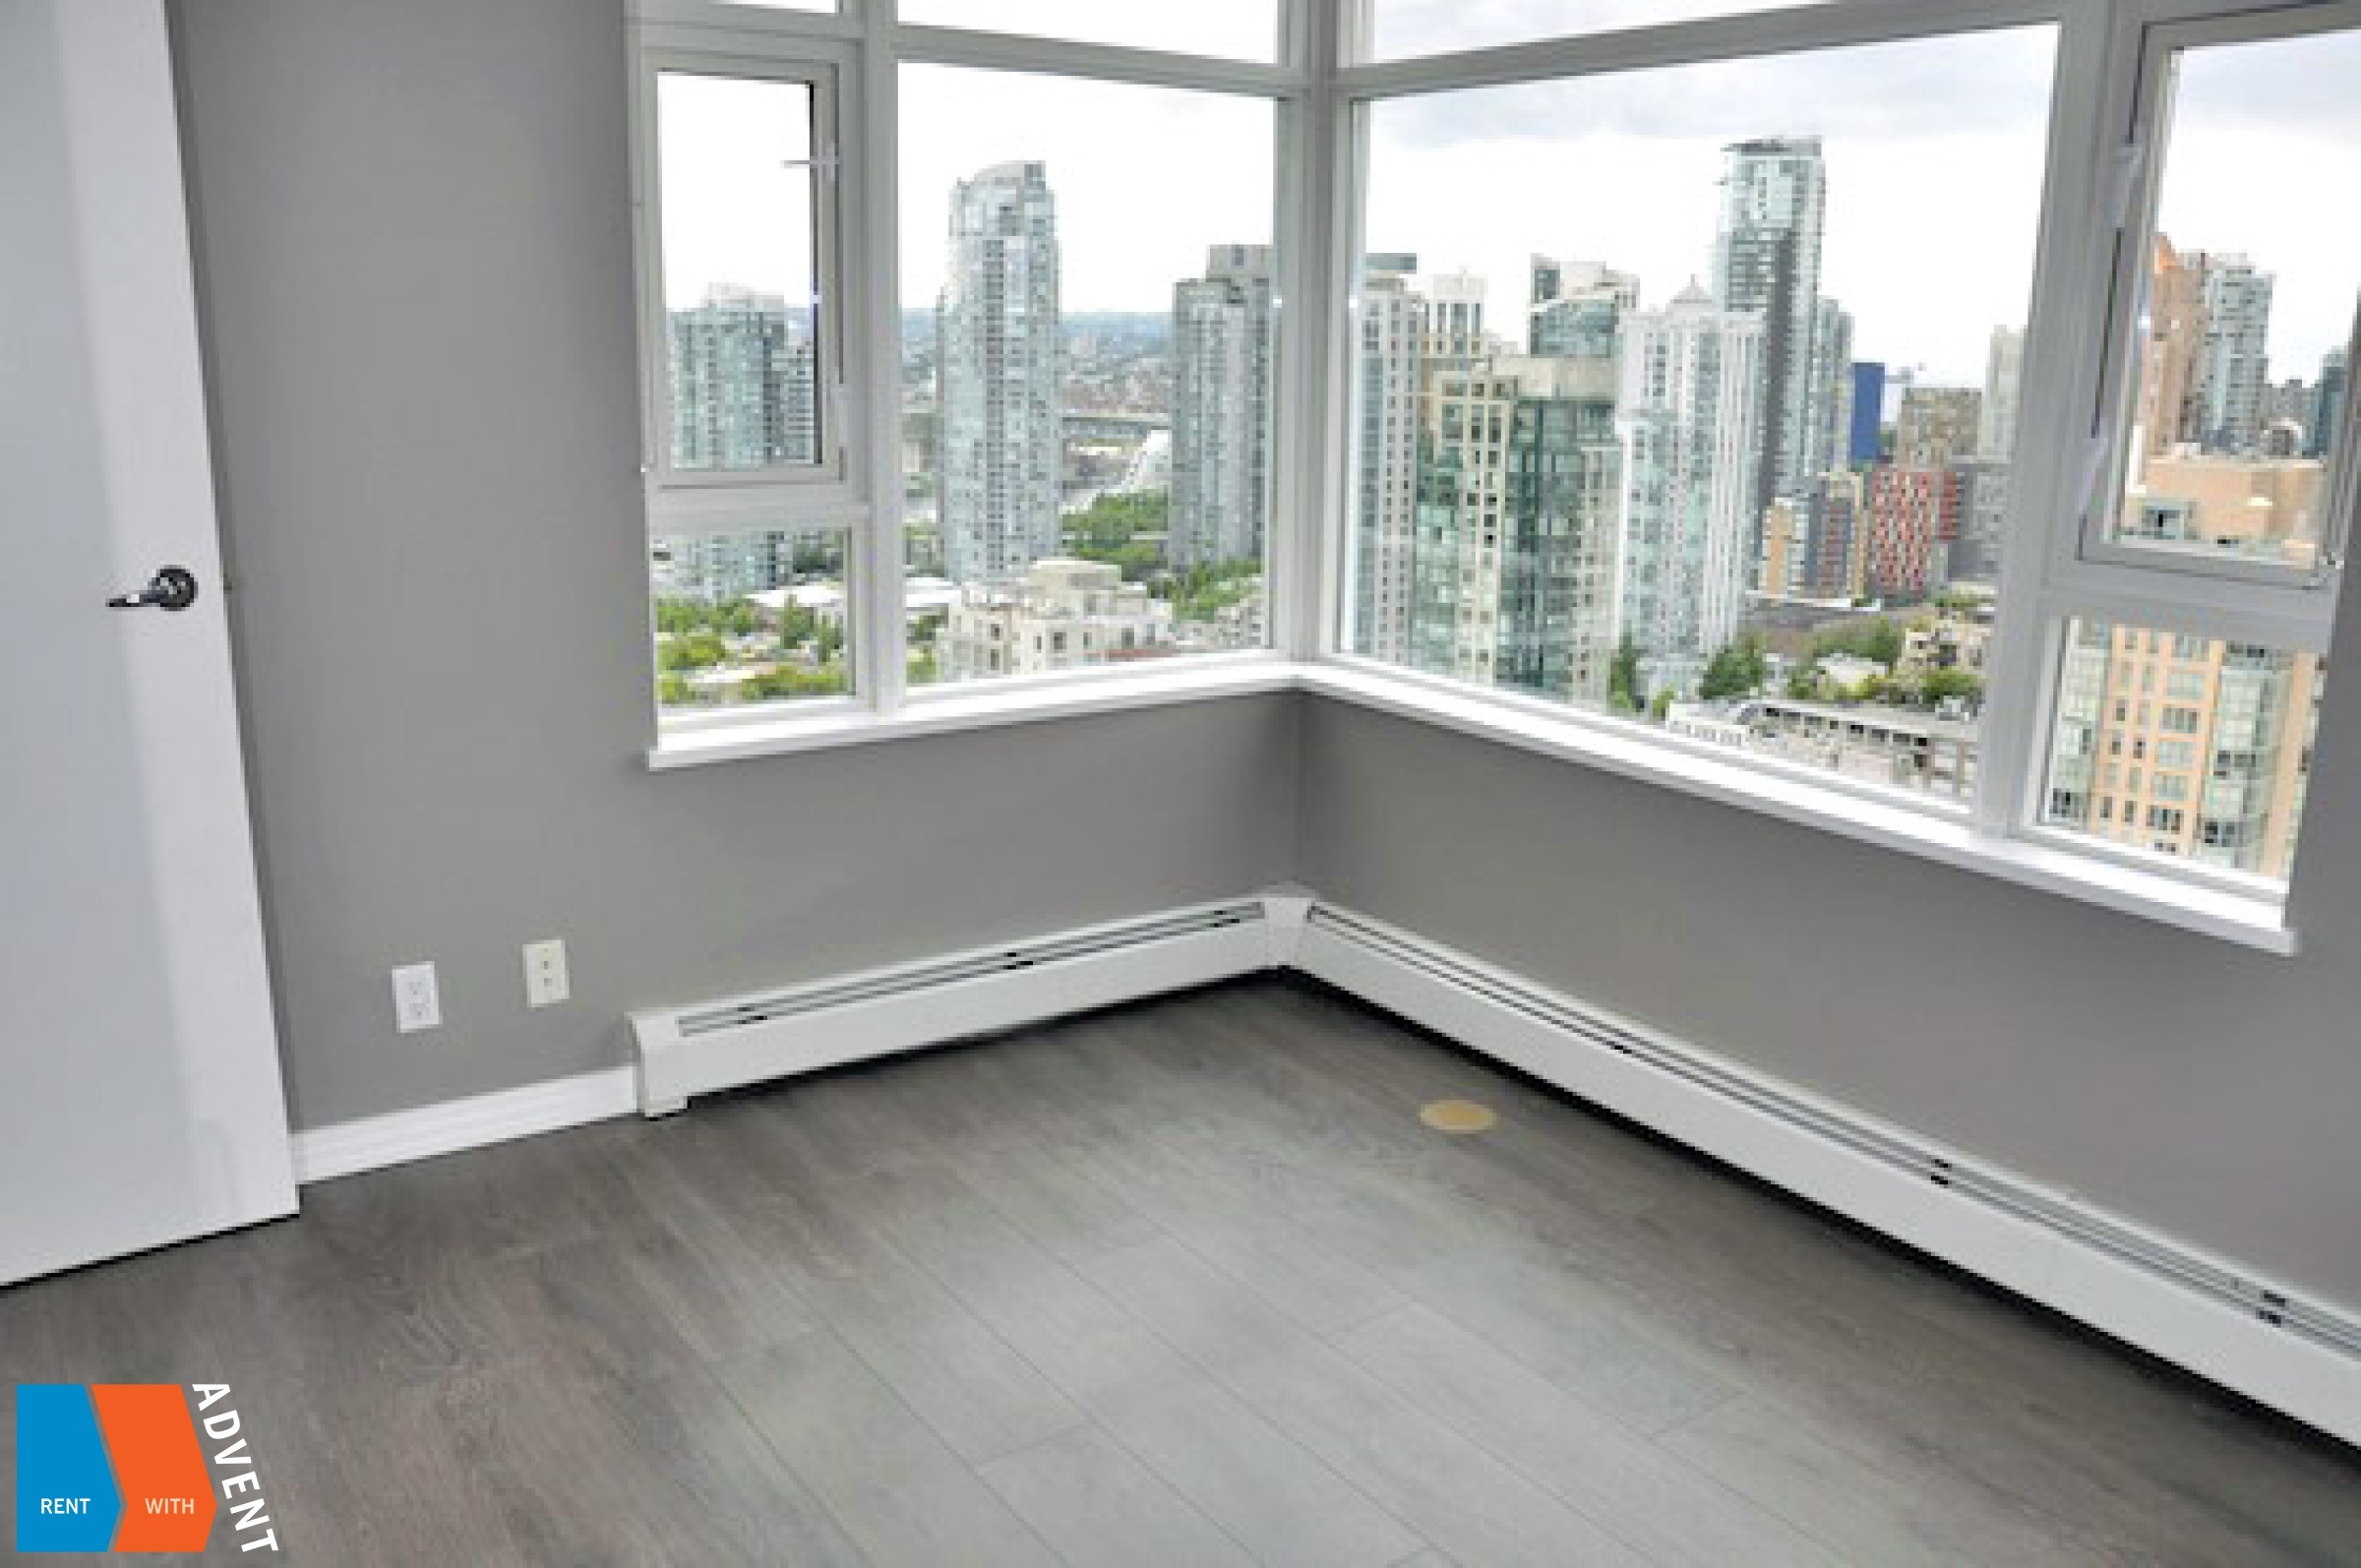 Aquarius I 36th Floor Unfurnished 1 Bedroom Apartment Rental in Yaletown, Vancouver. 3606 - 1199 Marinaside Crescent, Vancouver, BC, Canada.